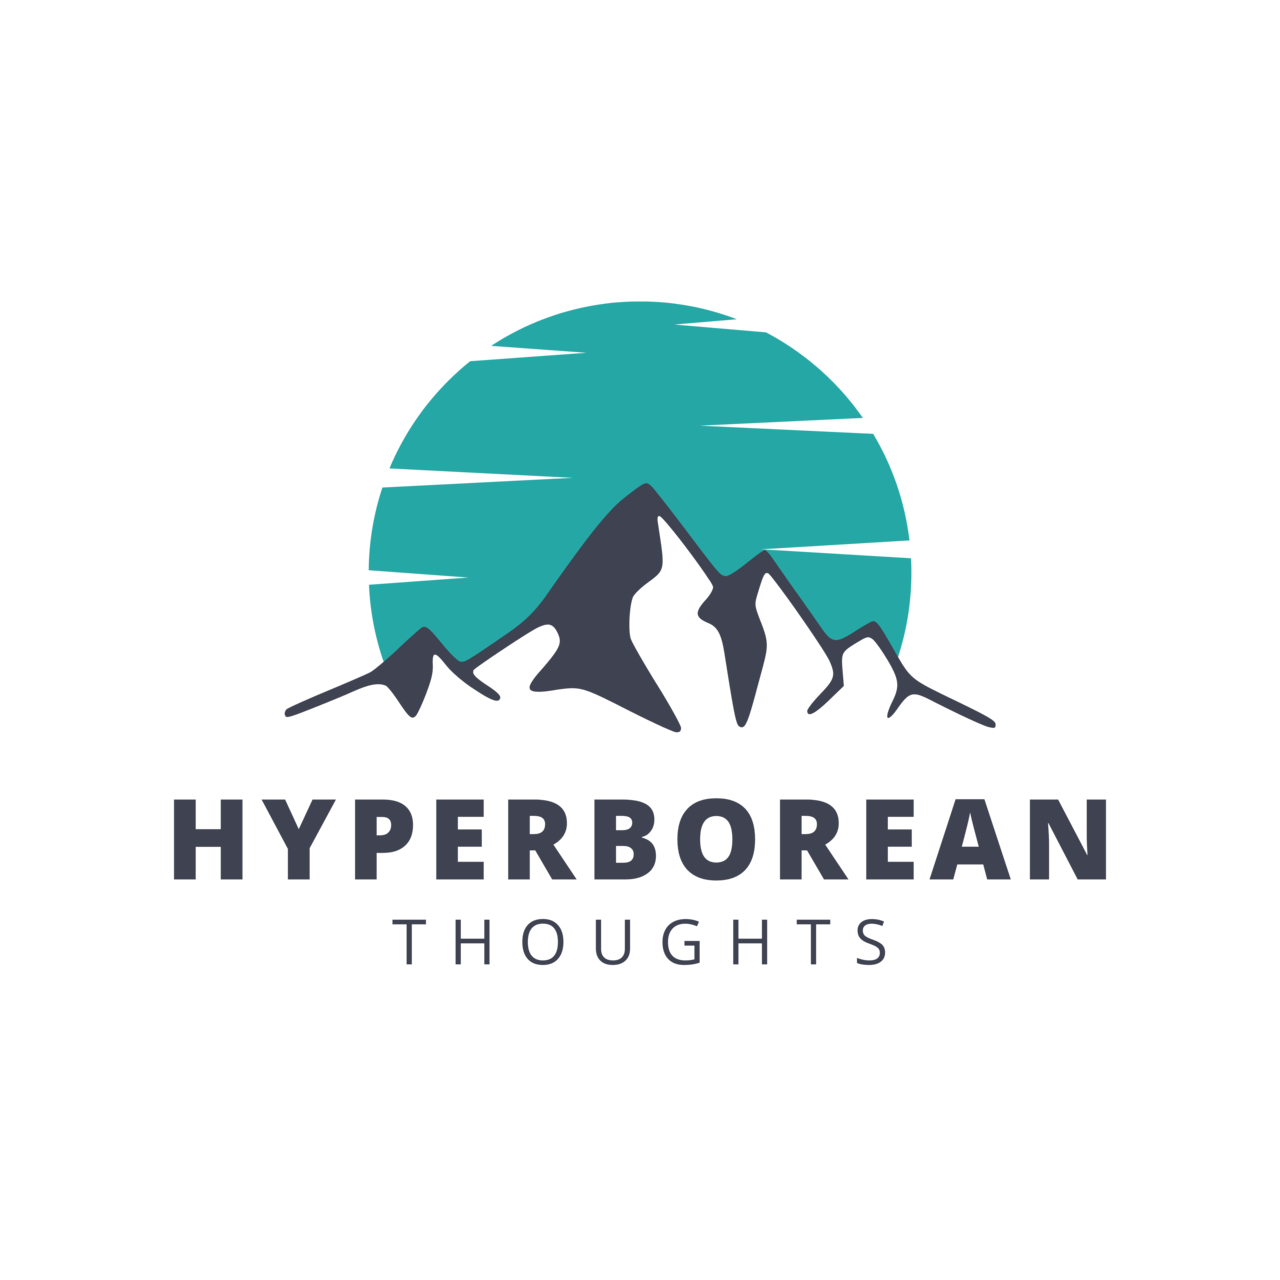 Hyperborean Thoughts